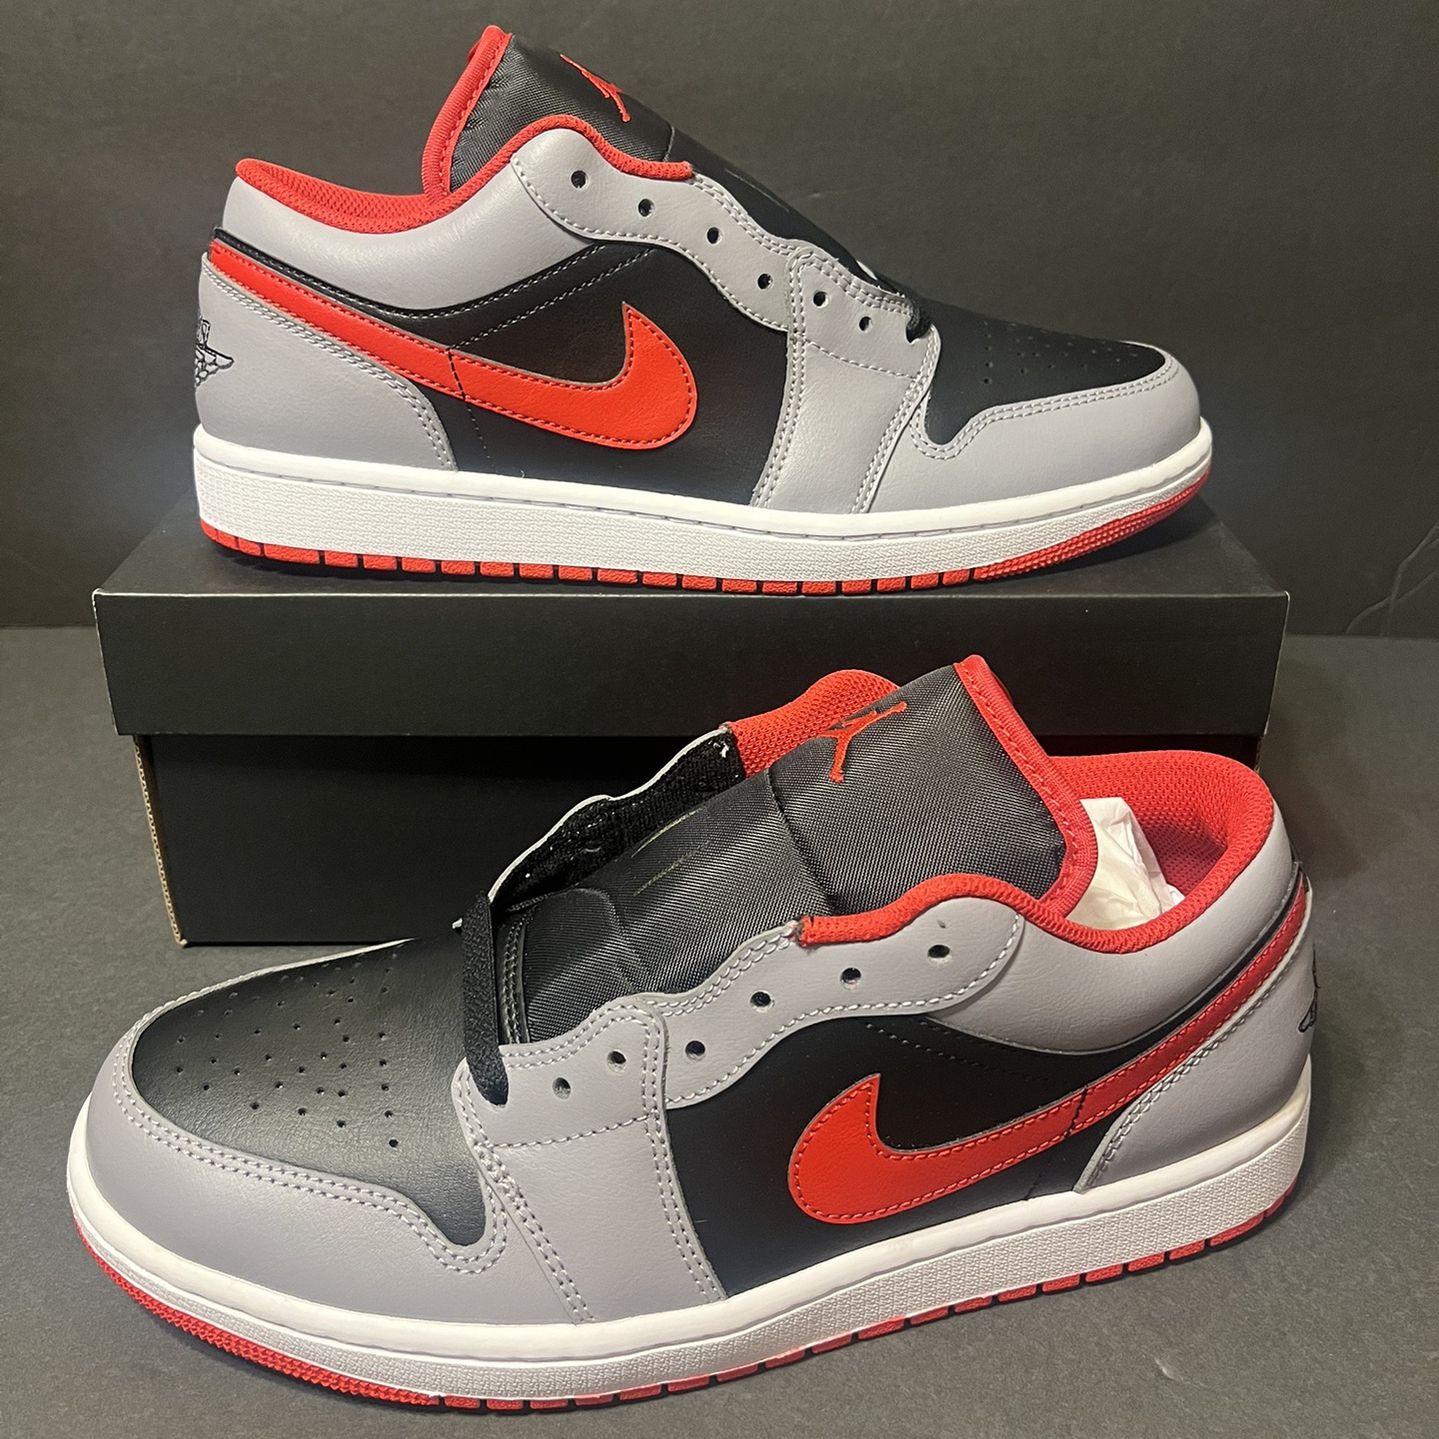 Air Jordan 1 Low Black Fire Red Cement Grey Multiple Sizes Available